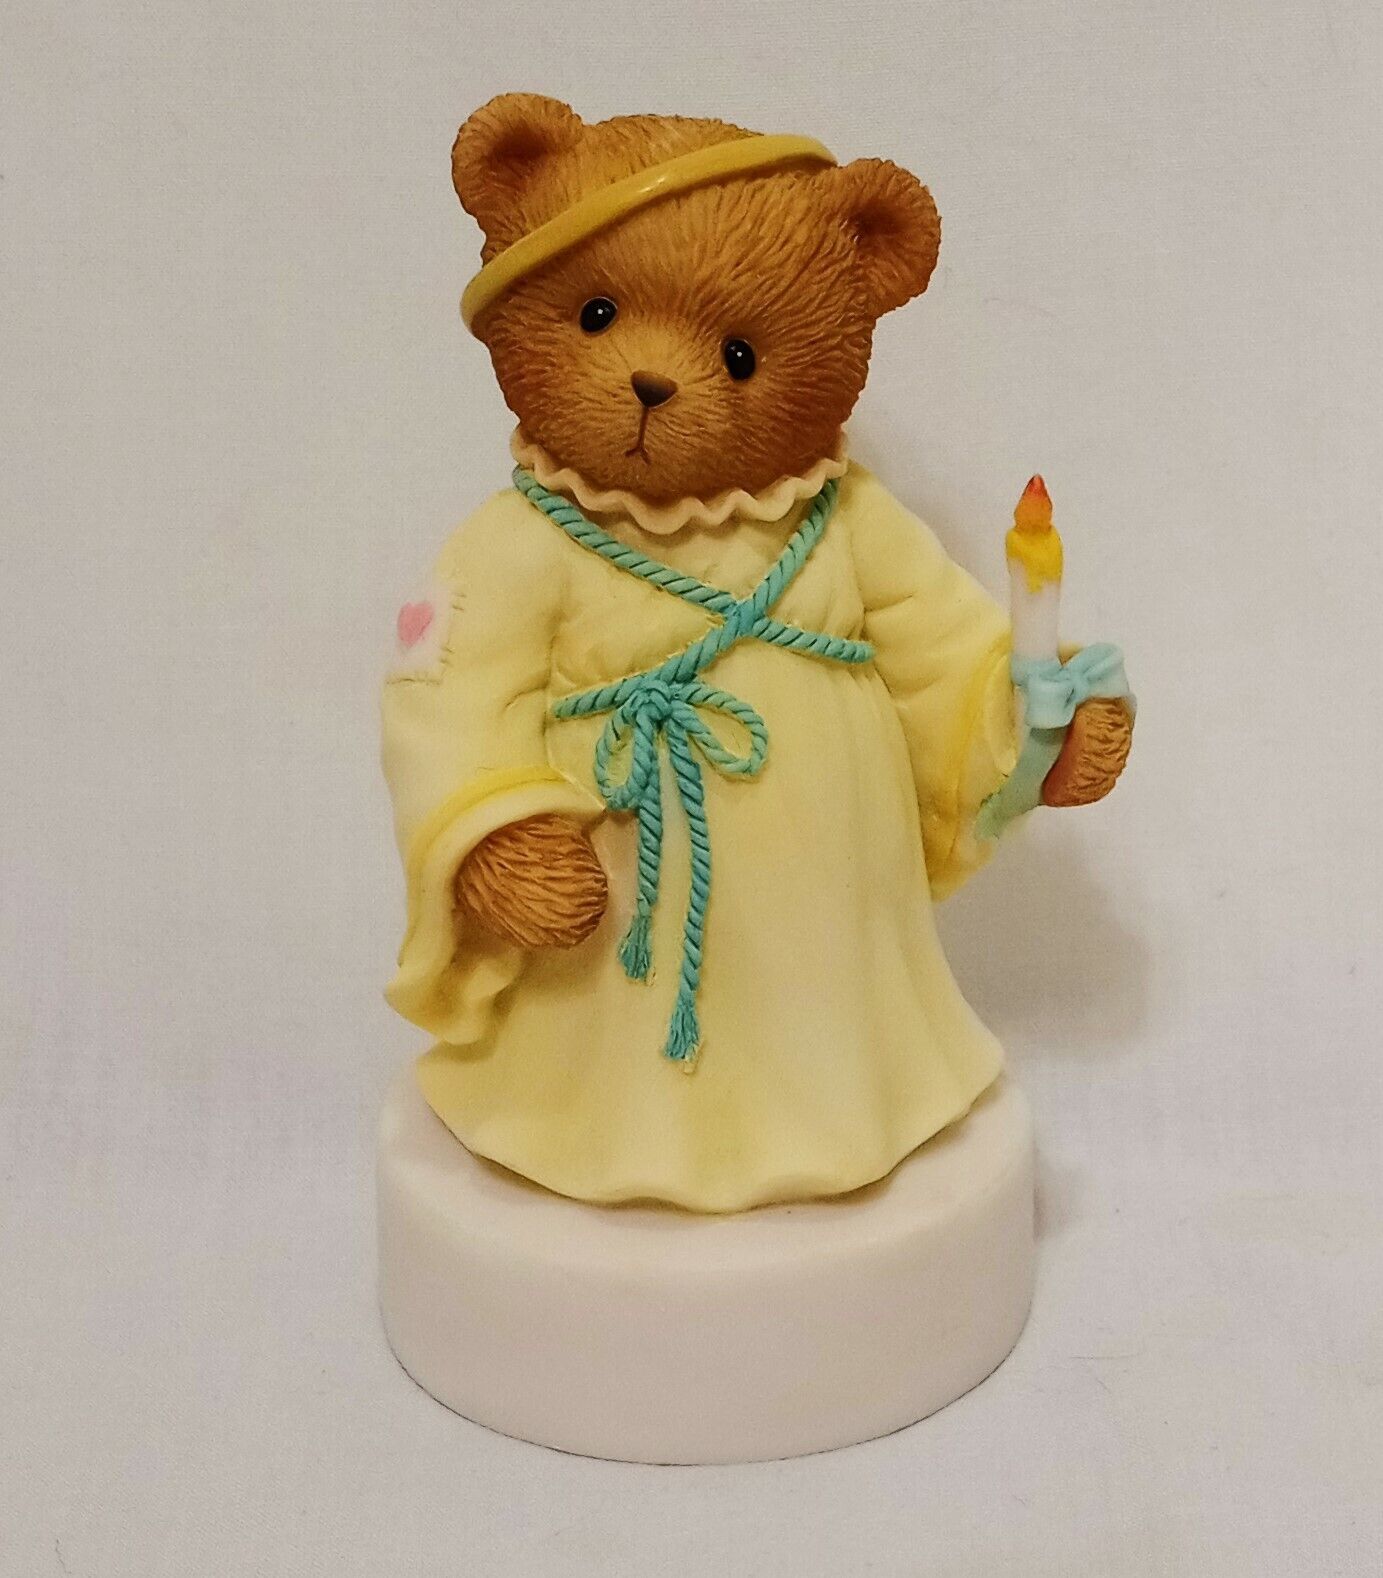 Cherished Teddies In Heart and Memory 2006 Enesco Hillman Family 4008168 4" - $39.59